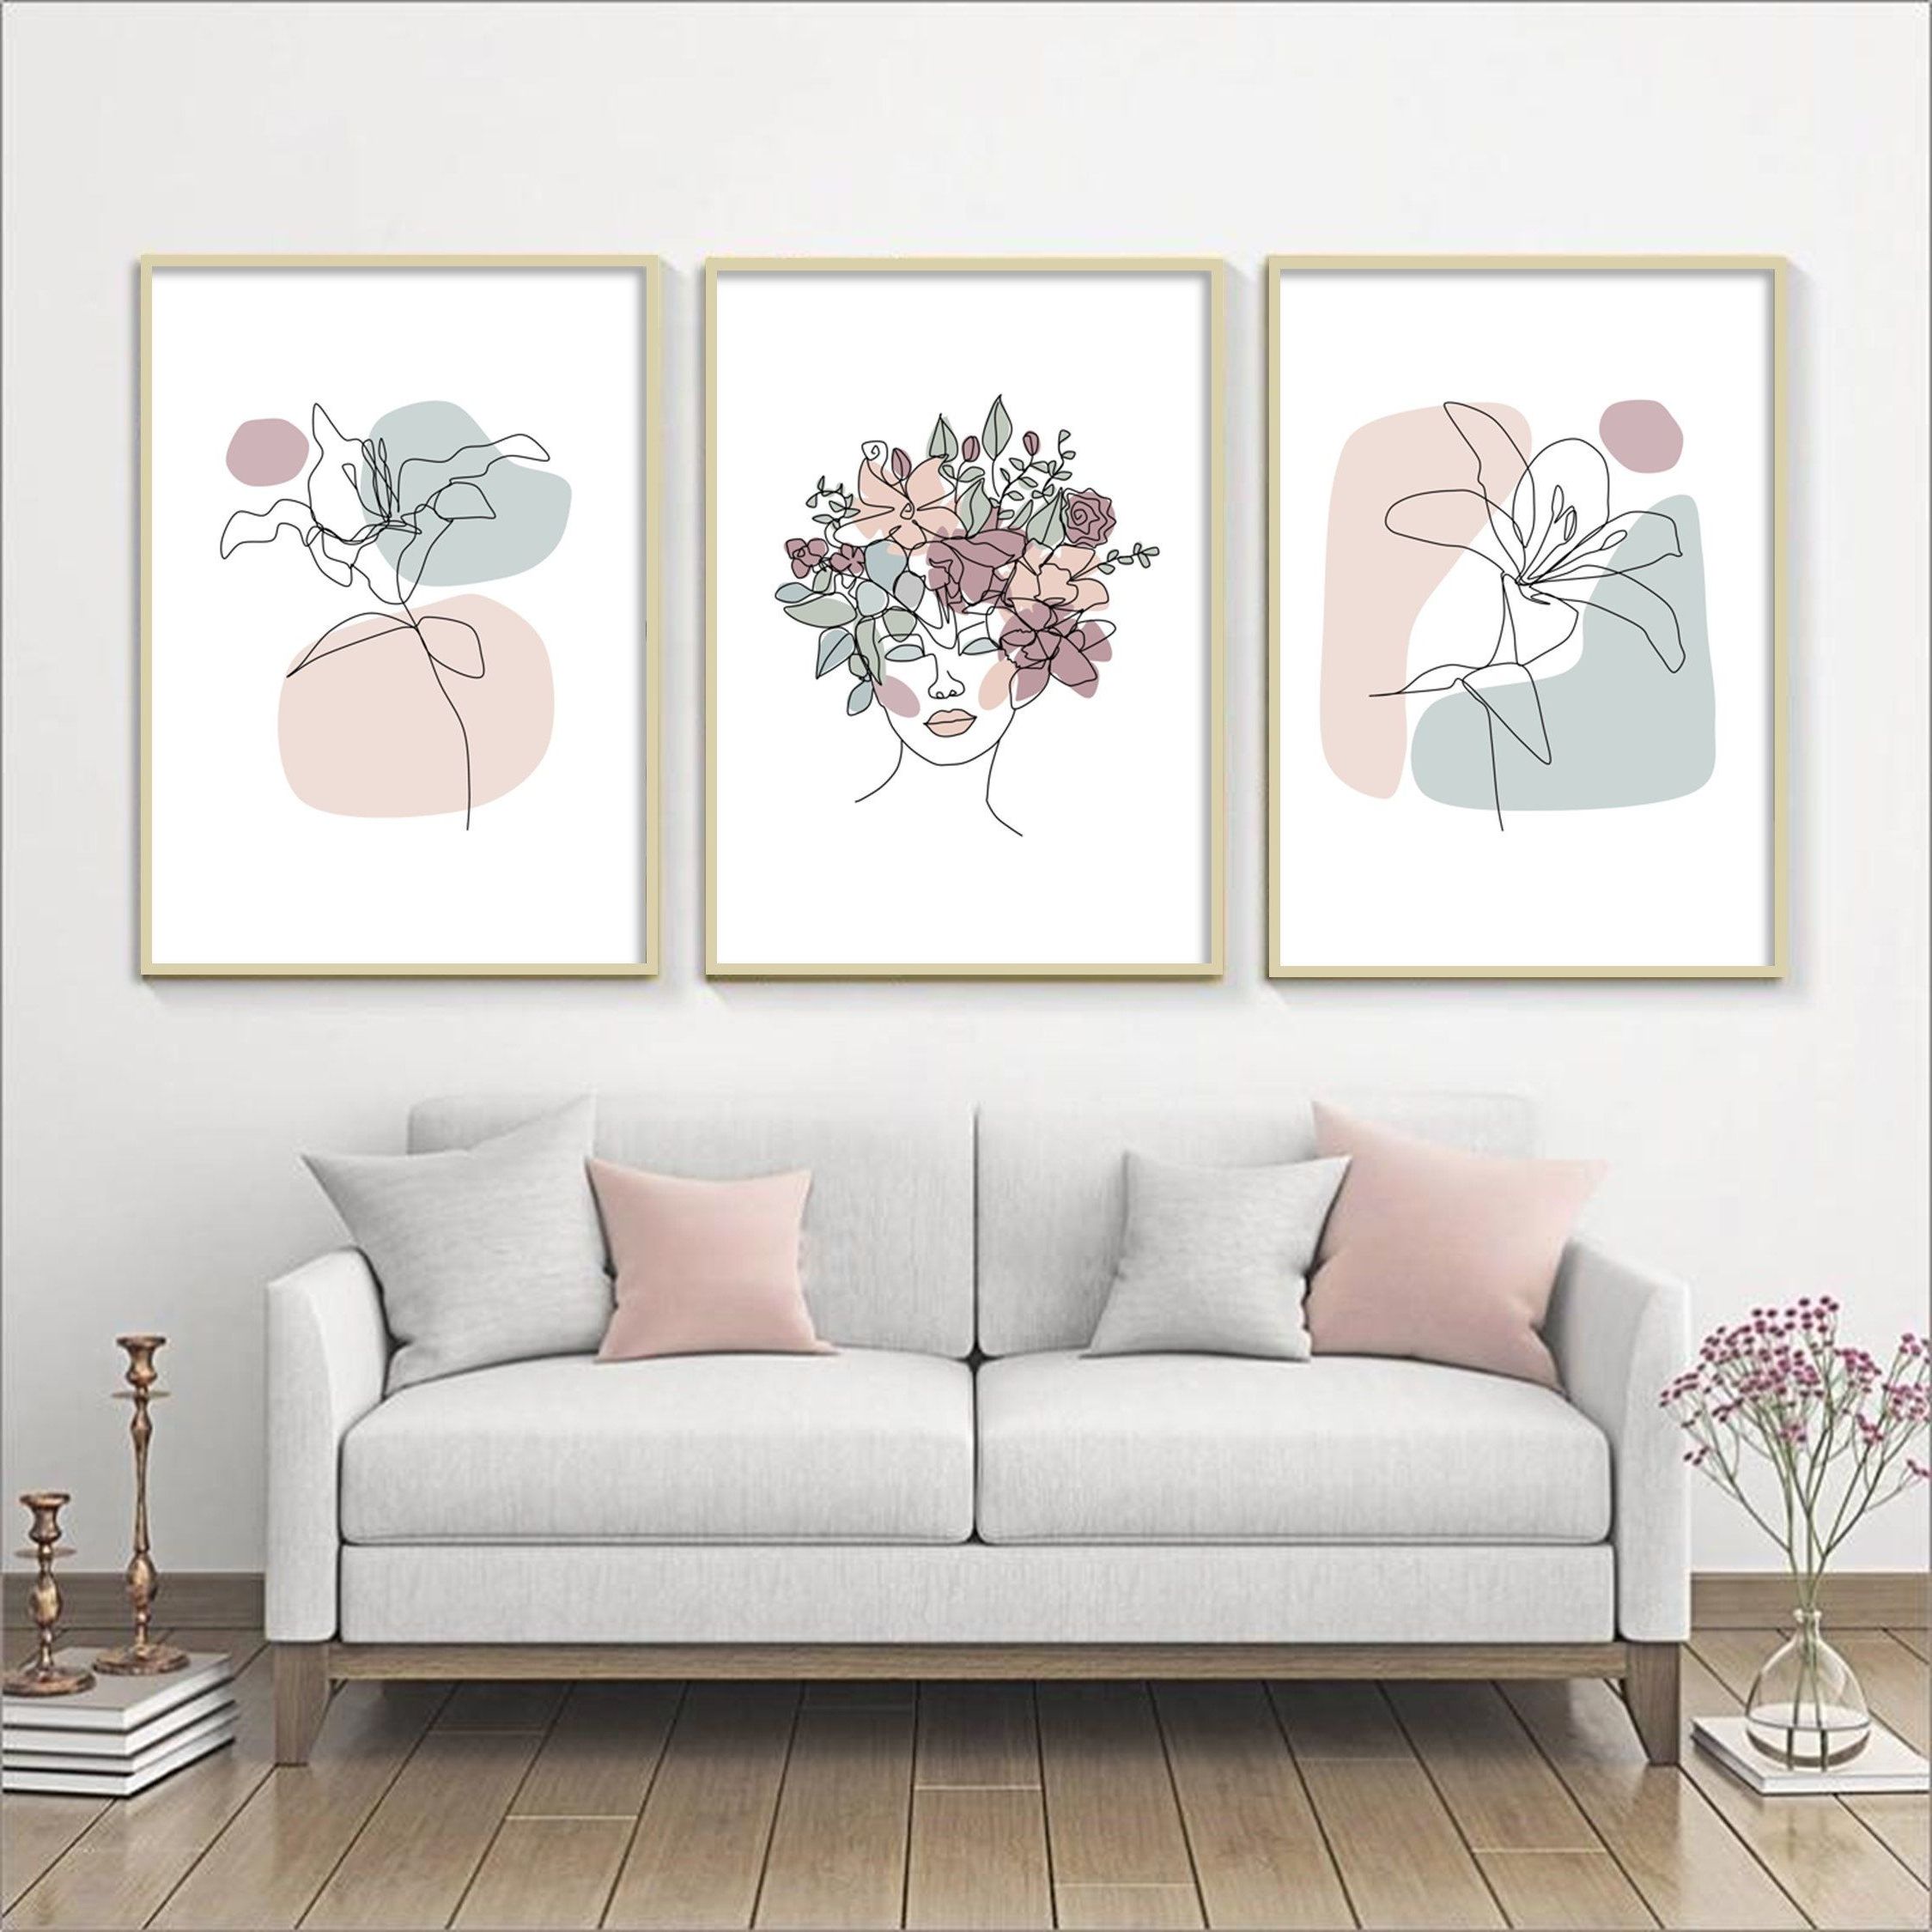 Female Wall Art Intended For Widely Used Flower Head Set Of 3 Line Art Prints Modern Minimalist Female – Etsy (View 11 of 15)